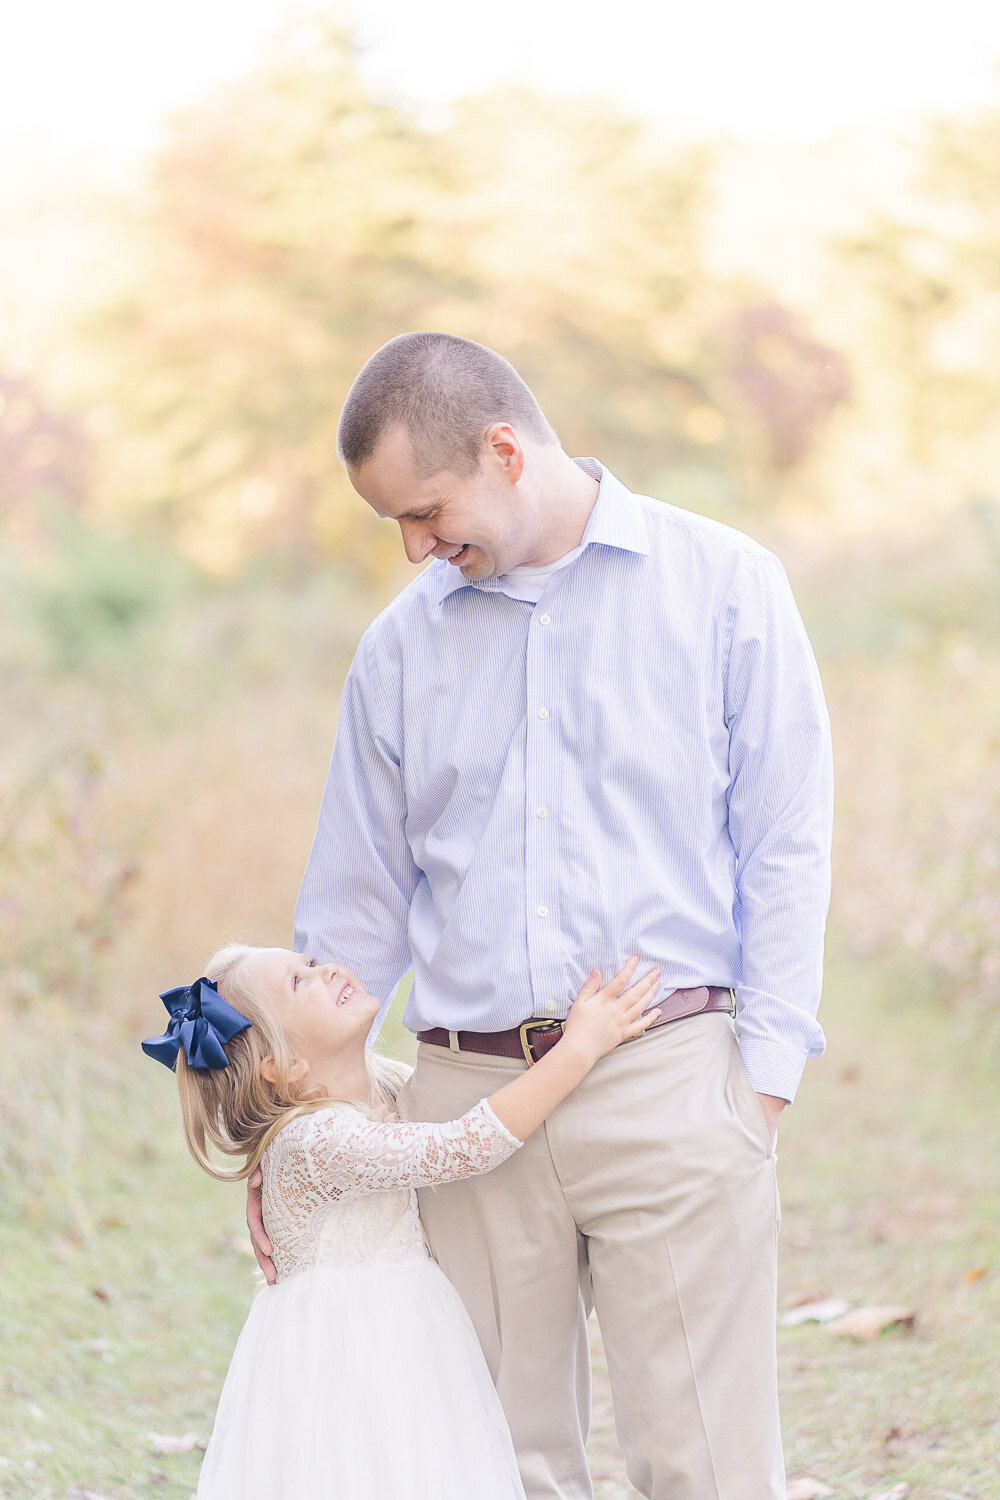 dad and daughter looking at each other during fall mini session taken by a Fairfax, VA photographer